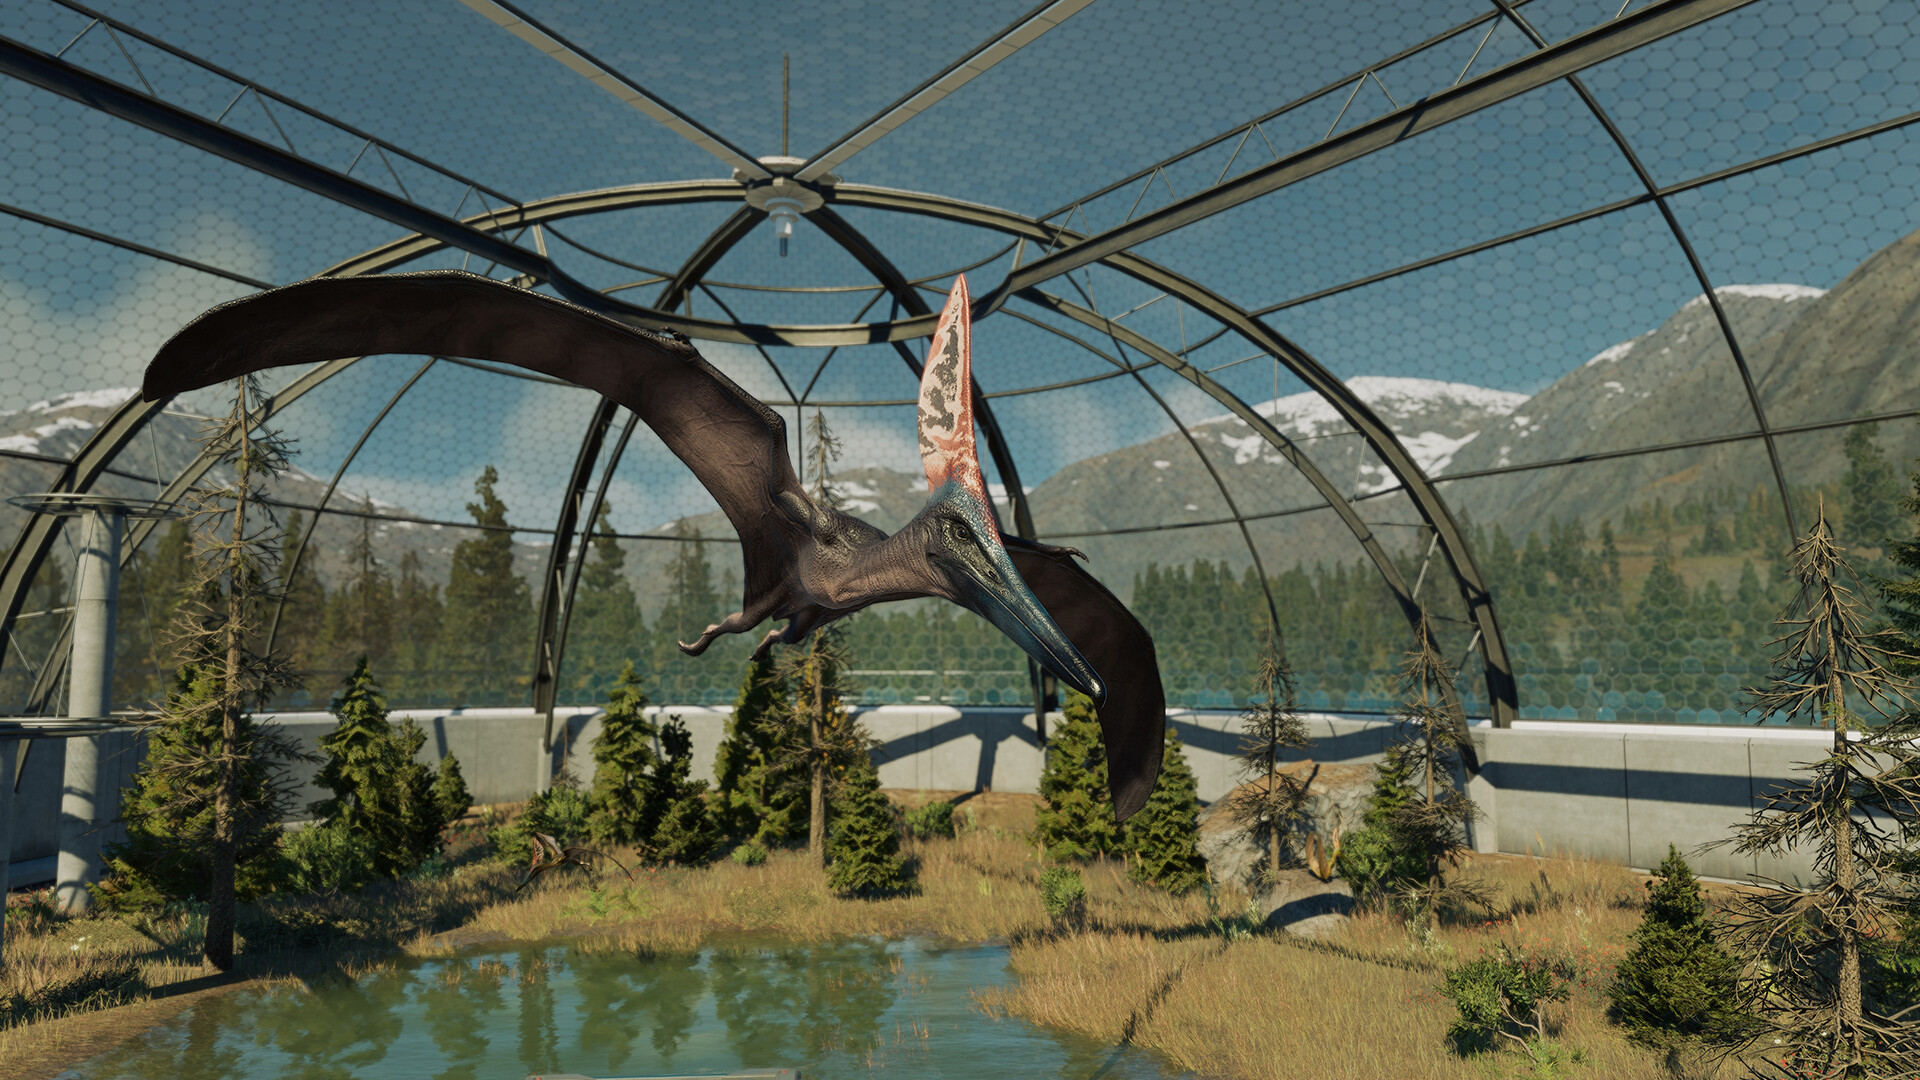 Jurassic World Evolution Drops A Release Date and a Dino-Sized Chunk of  Gameplay